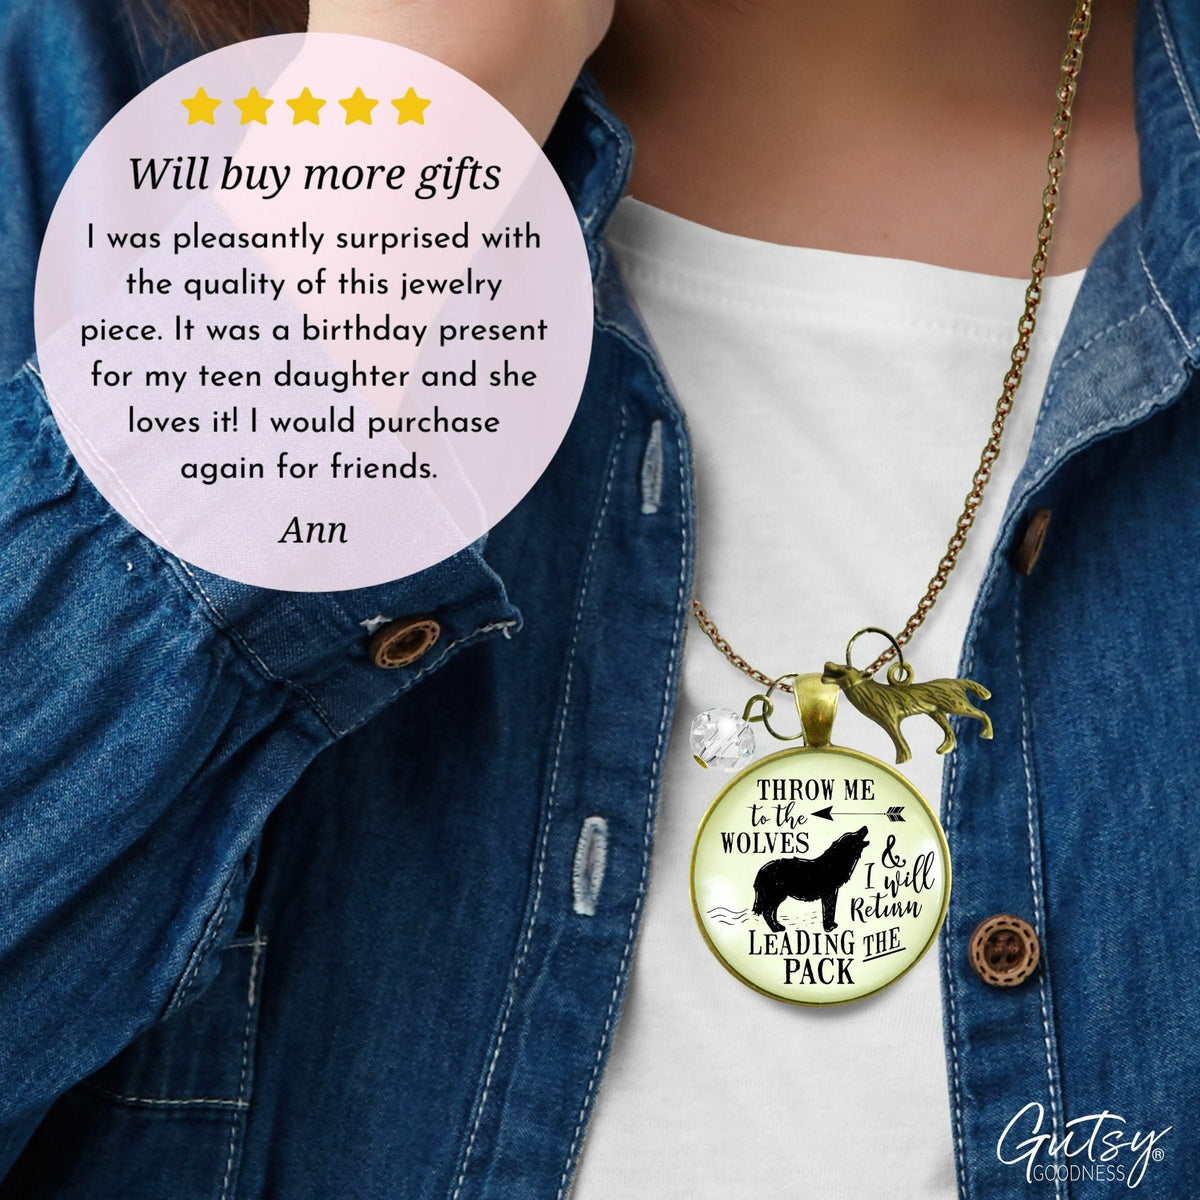 Gutsy Goodness Wolf Necklace Throw Me to Wolves Leading Pack Survivor Jewelry Charm - Gutsy Goodness Handmade Jewelry;Wolf Necklace Throw Me To Wolves Leading Pack Survivor Jewelry Charm - Gutsy Goodness Handmade Jewelry Gifts